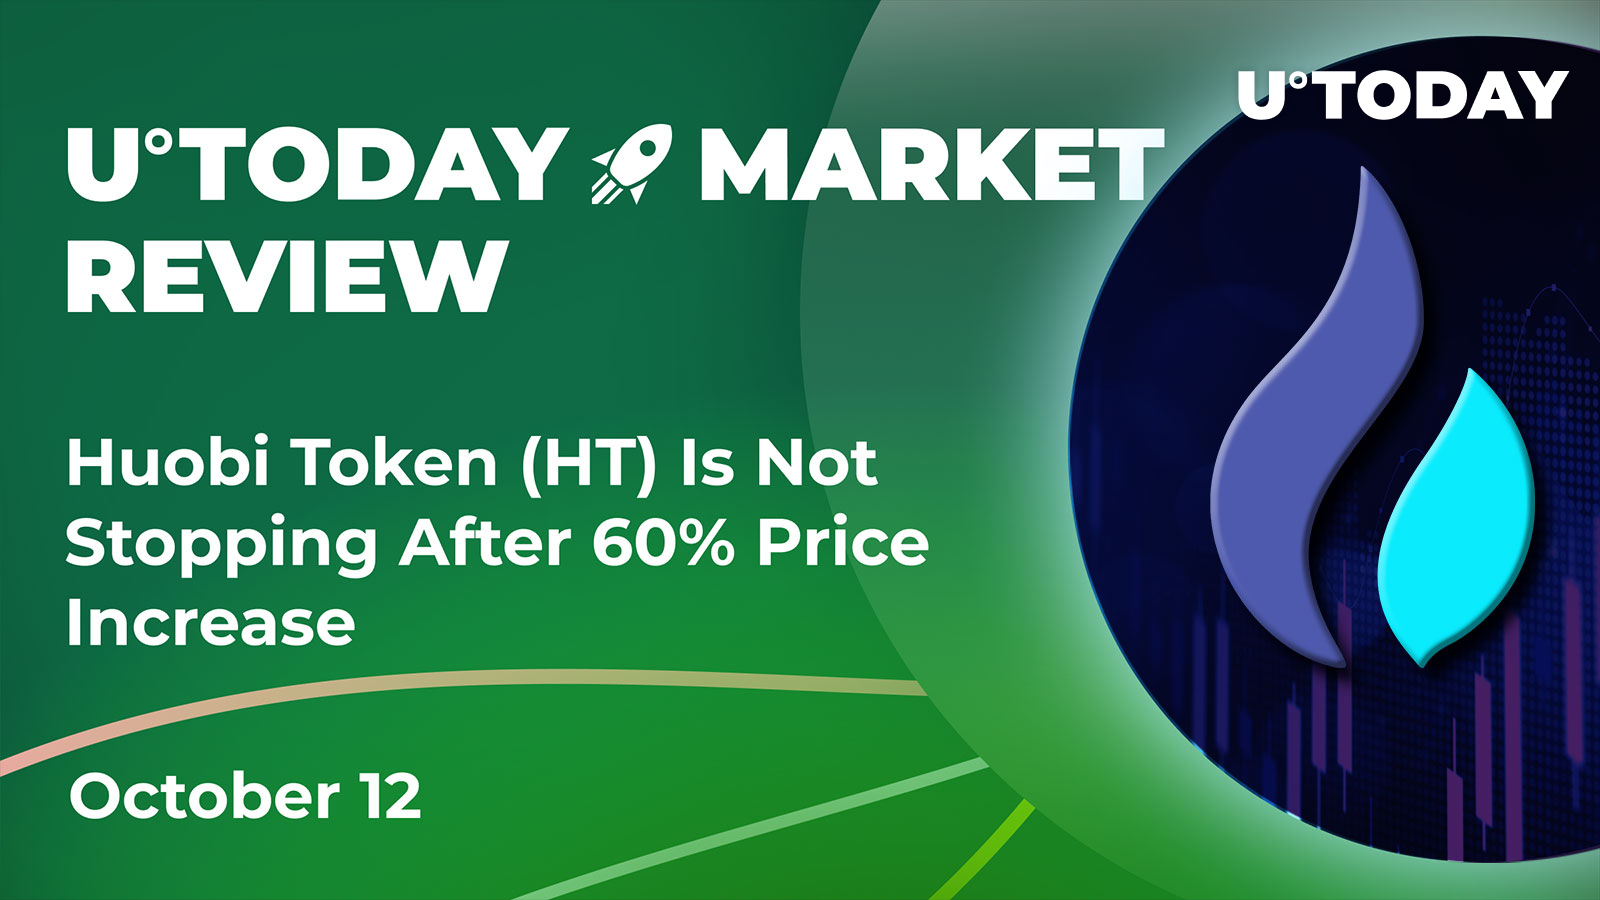 Huobi Token (HT) Is Not Stopping After 60% Price Increase: Crypto Market Review, October 12